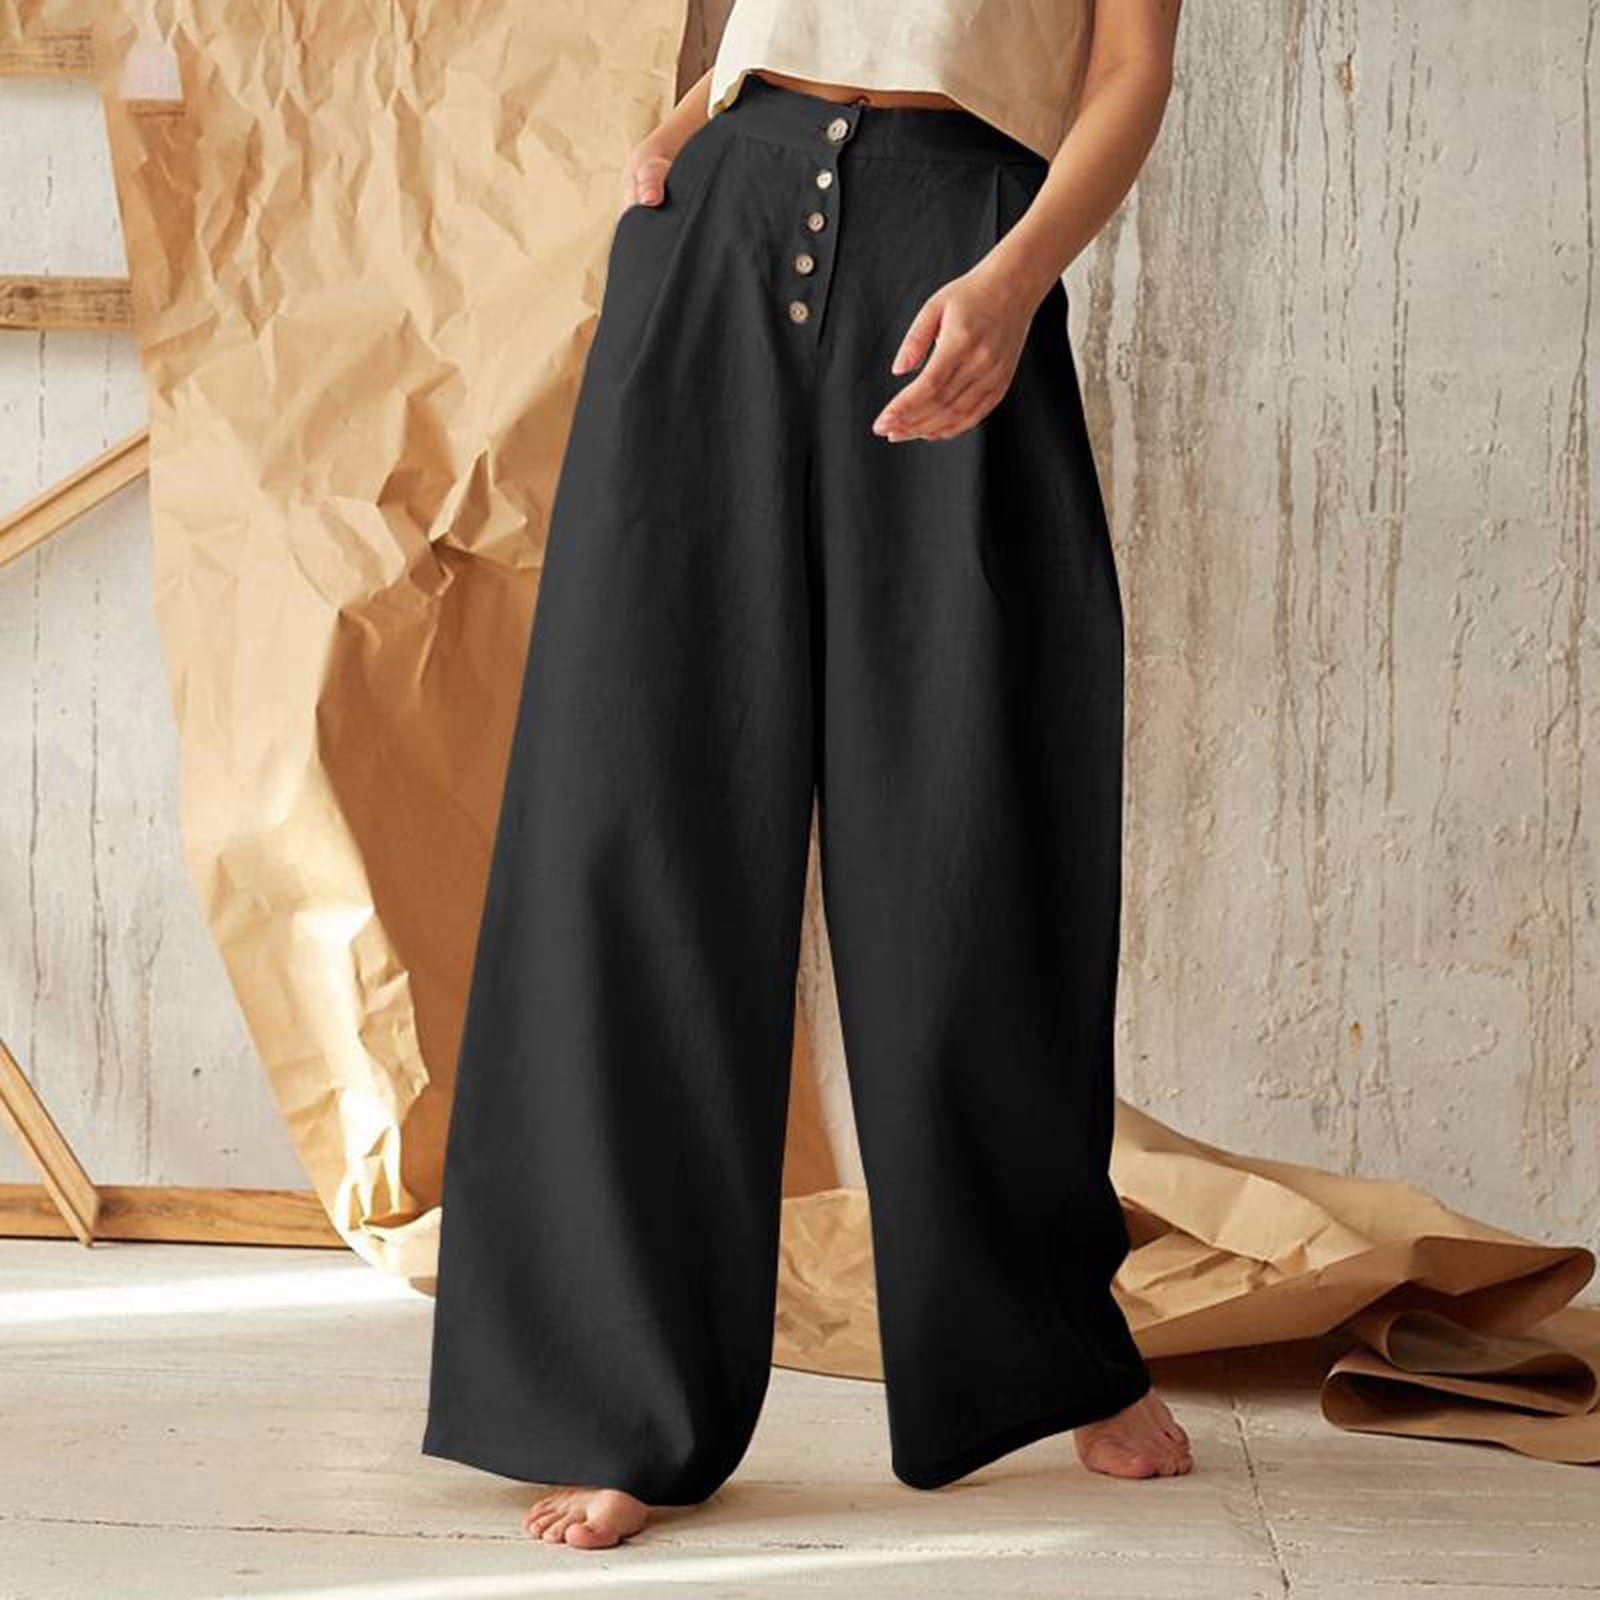 Tawop Fashion Women'S Print Casual Loose Cotton And Linen Retro Wide-Leg  Pants Forbidden Pants Easter Gifts , forbidden pants - thirstymag.com